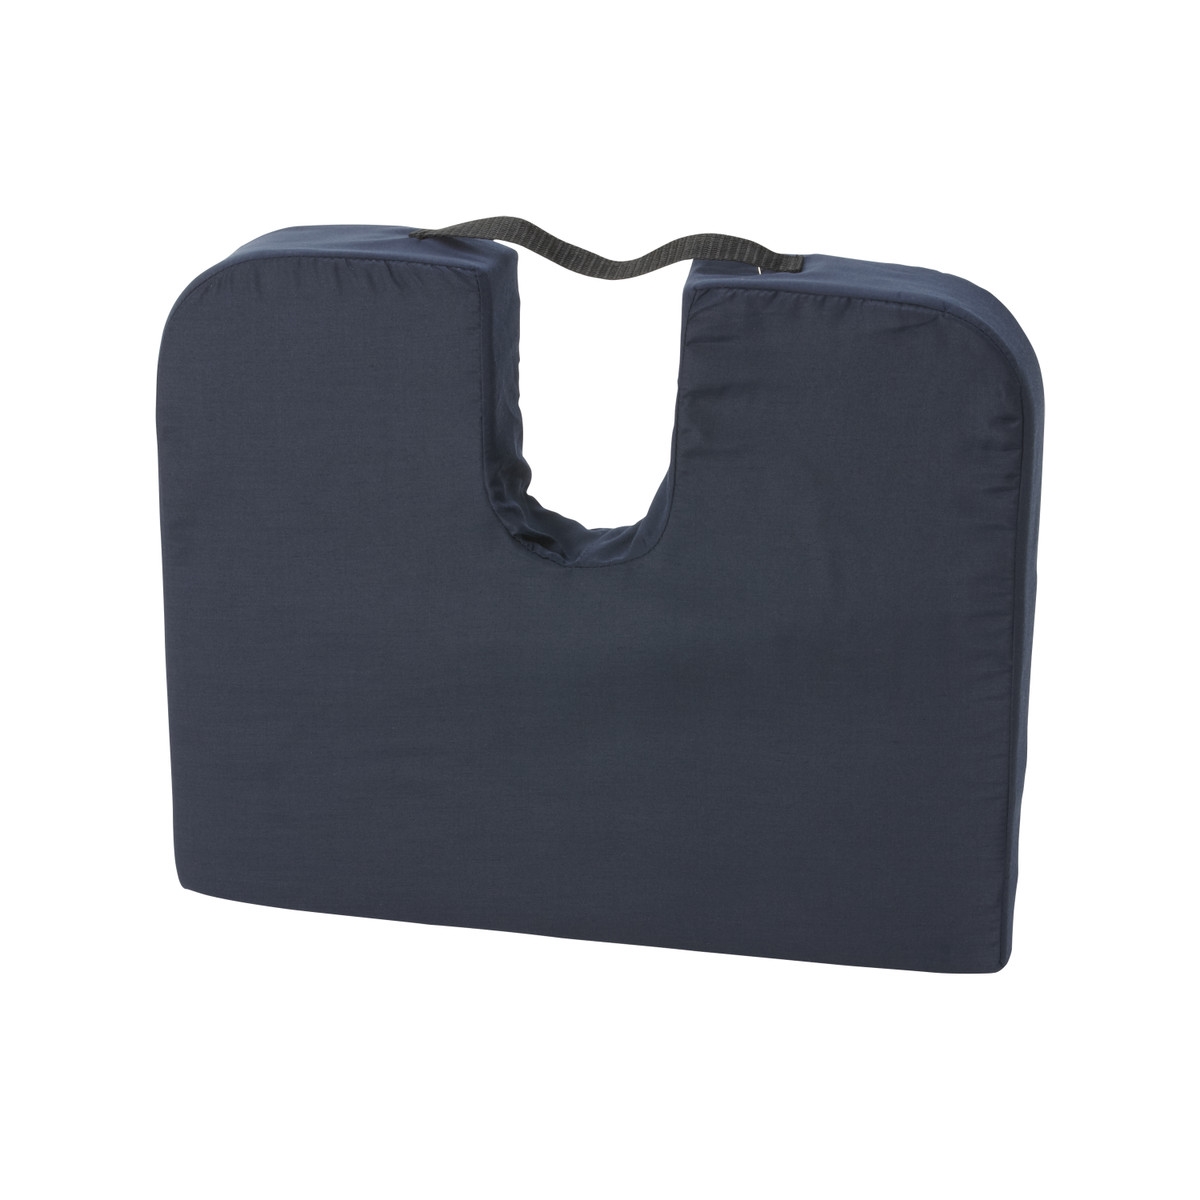 HealthSmart Seat Mate - Sloping Coccyx Cushion